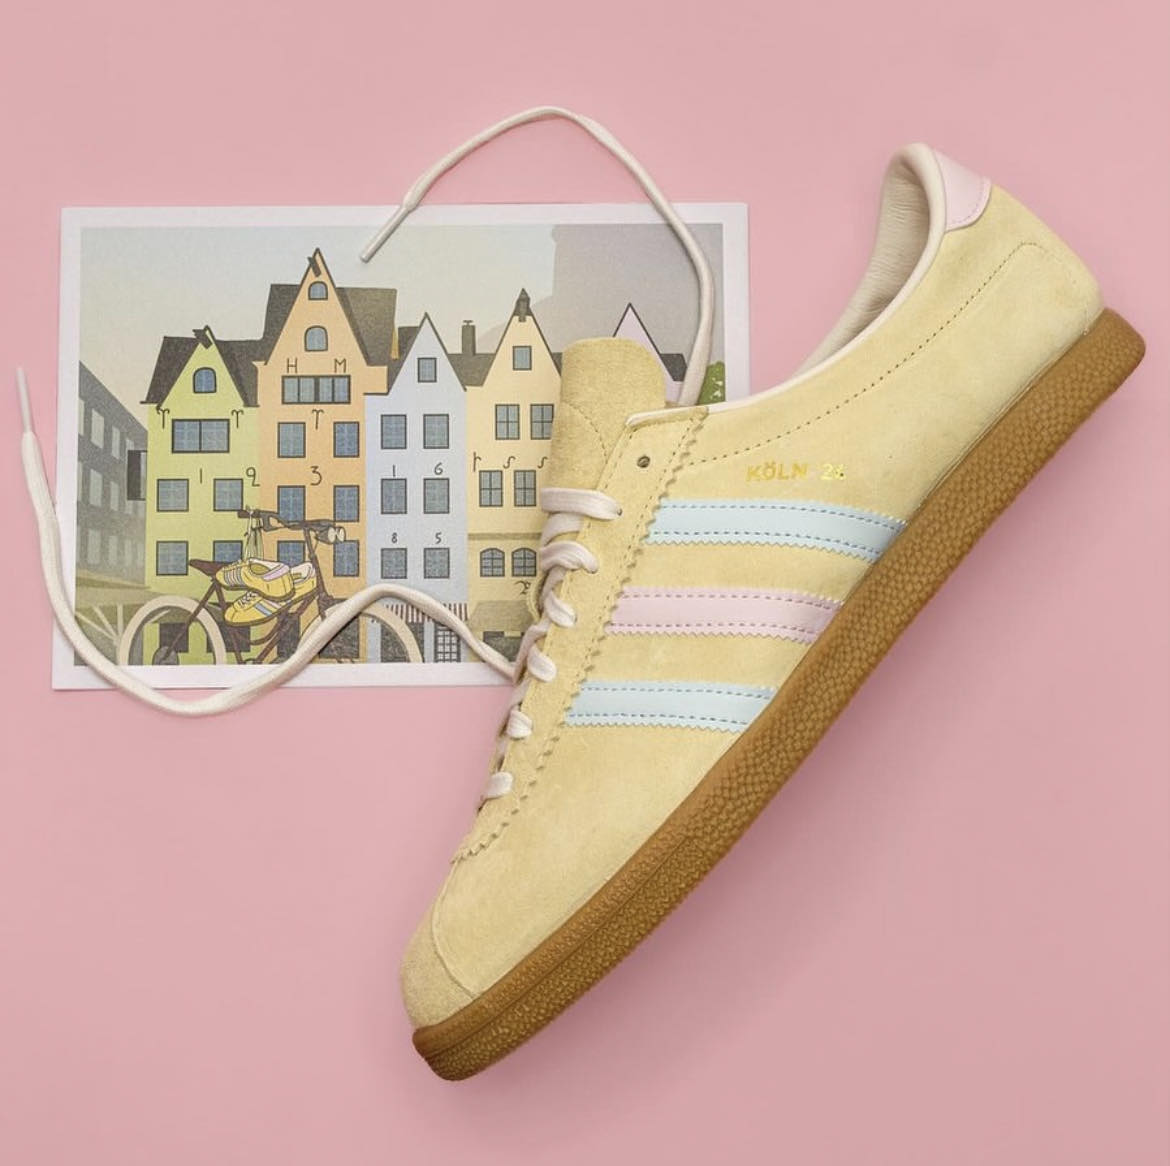 Ad: Next up in the Euros 24 Pack...⚽️

The adidas Koln 24' is coming very soon and is expected to release this Wednesday @ 8am

Built with premium suede uppers and bold tricolour 3-Stripes influenced by the city's vibrant houses.

Stockist info to follow